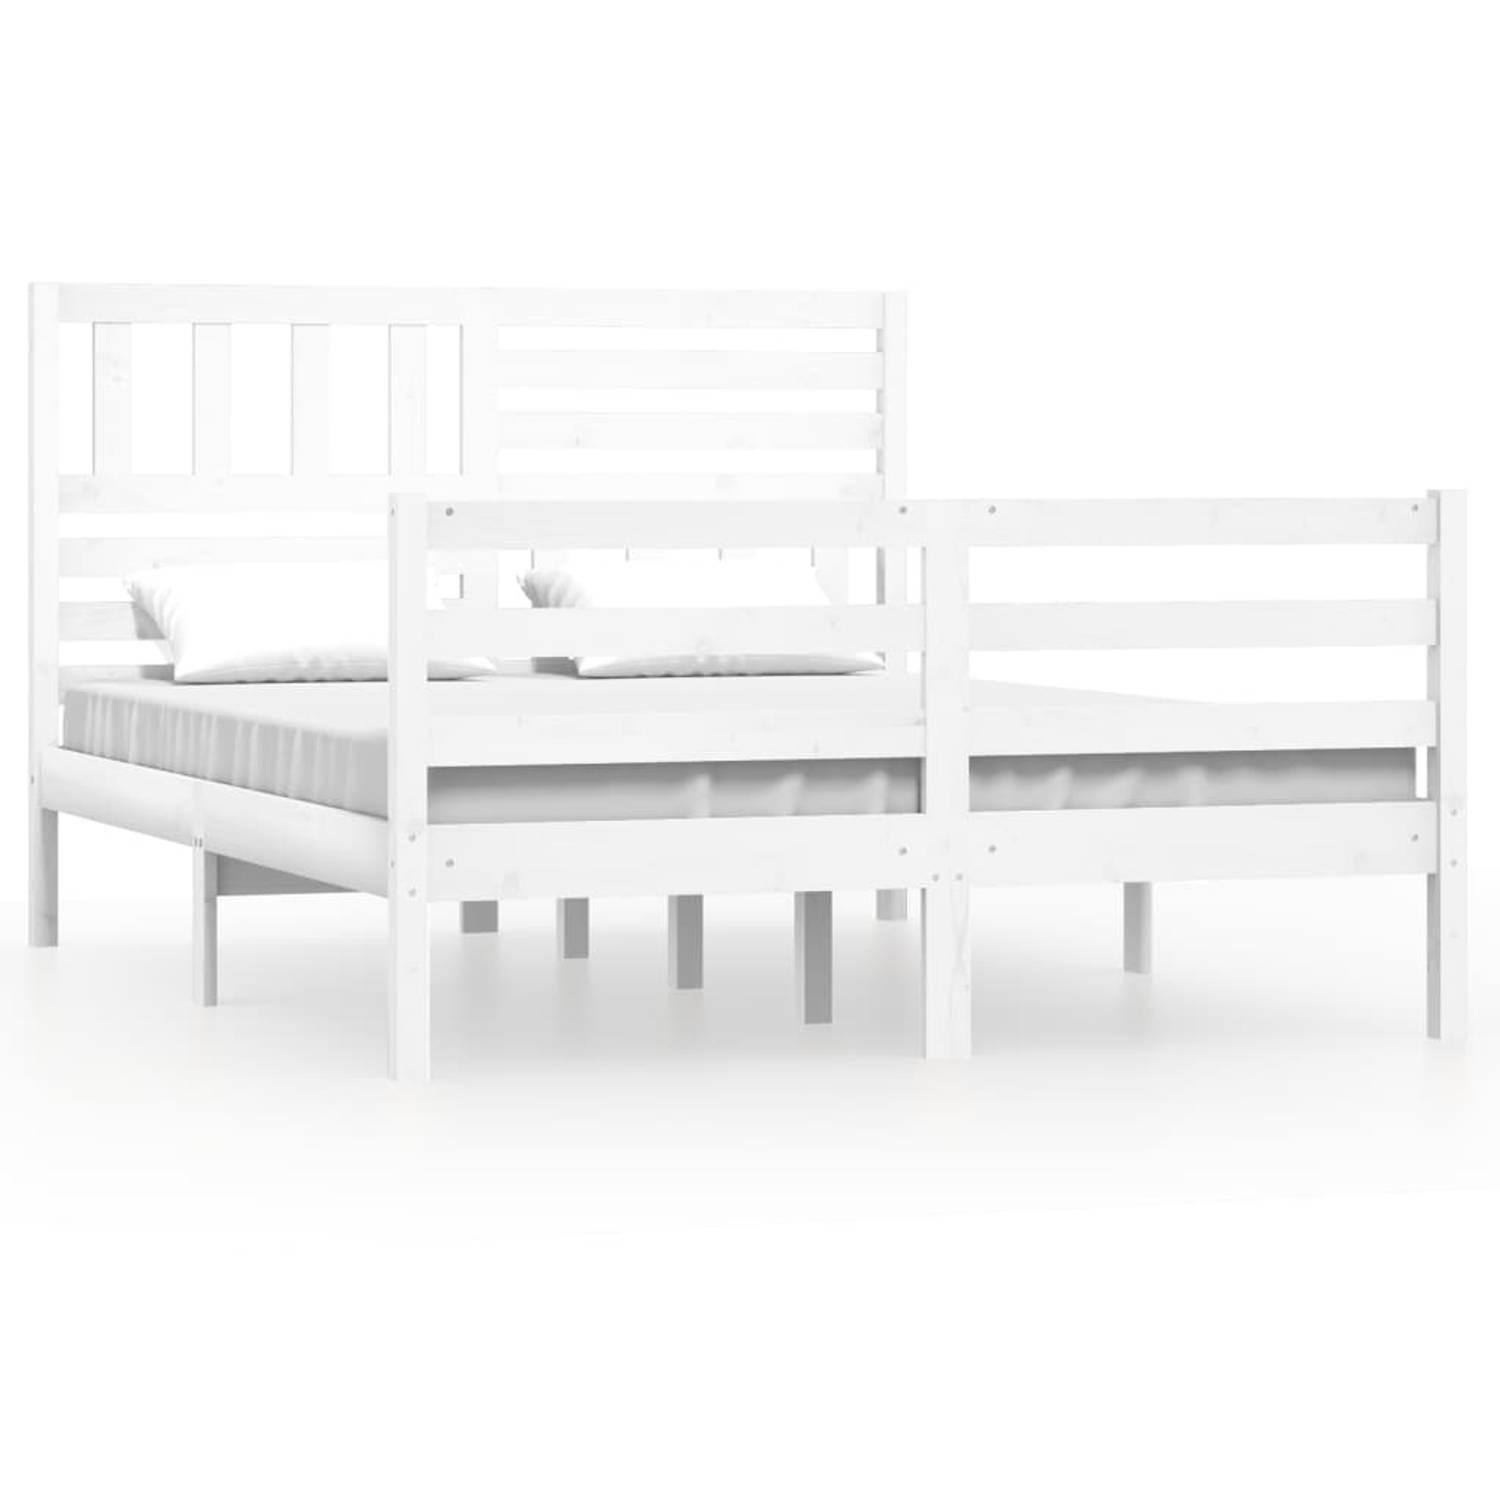 The Living Store Bedframe massief hout wit 120x200 cm - Bedframe - Bedframes - Tweepersoonsbed - Bed - Bedombouw - Dubbel Bed - Frame - Bed Frame - Ledikant - Bedframe Met Hoofdein